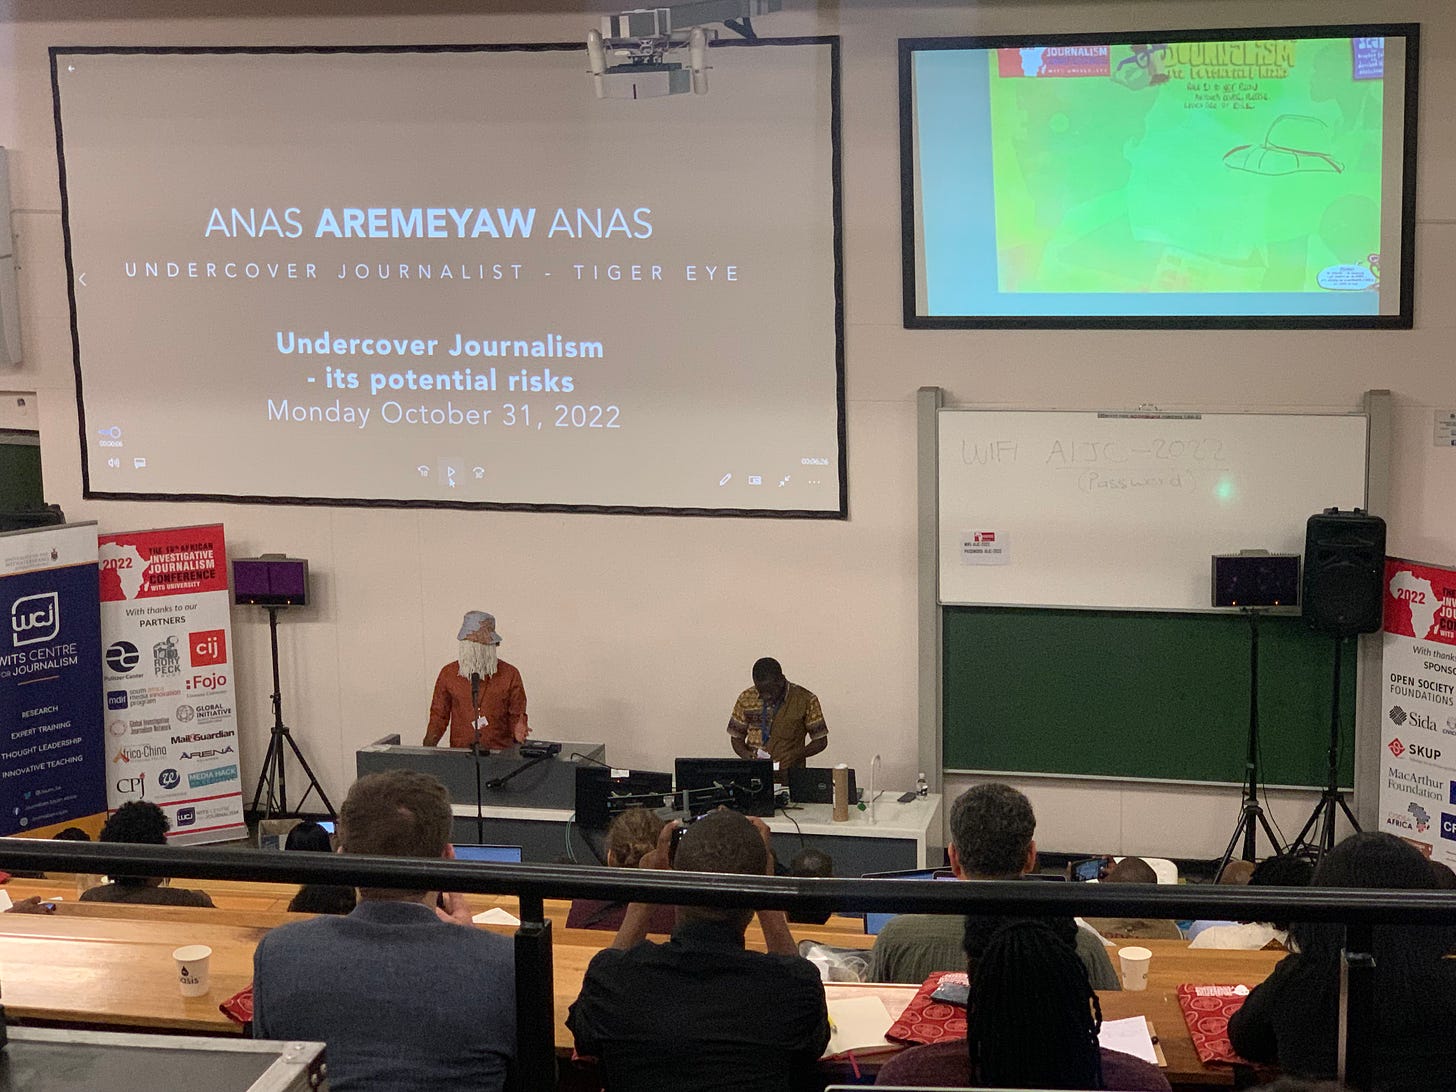 Anas Aremeyaw Anas, 🇬🇭  Under Cover Journalist - Tiger Eye at 18th African Investigative Journalism conference #AIJC Wits University, Johanesburg, South Africa #Mzansi 🇿🇦  @eagamor | The New Ghanaian